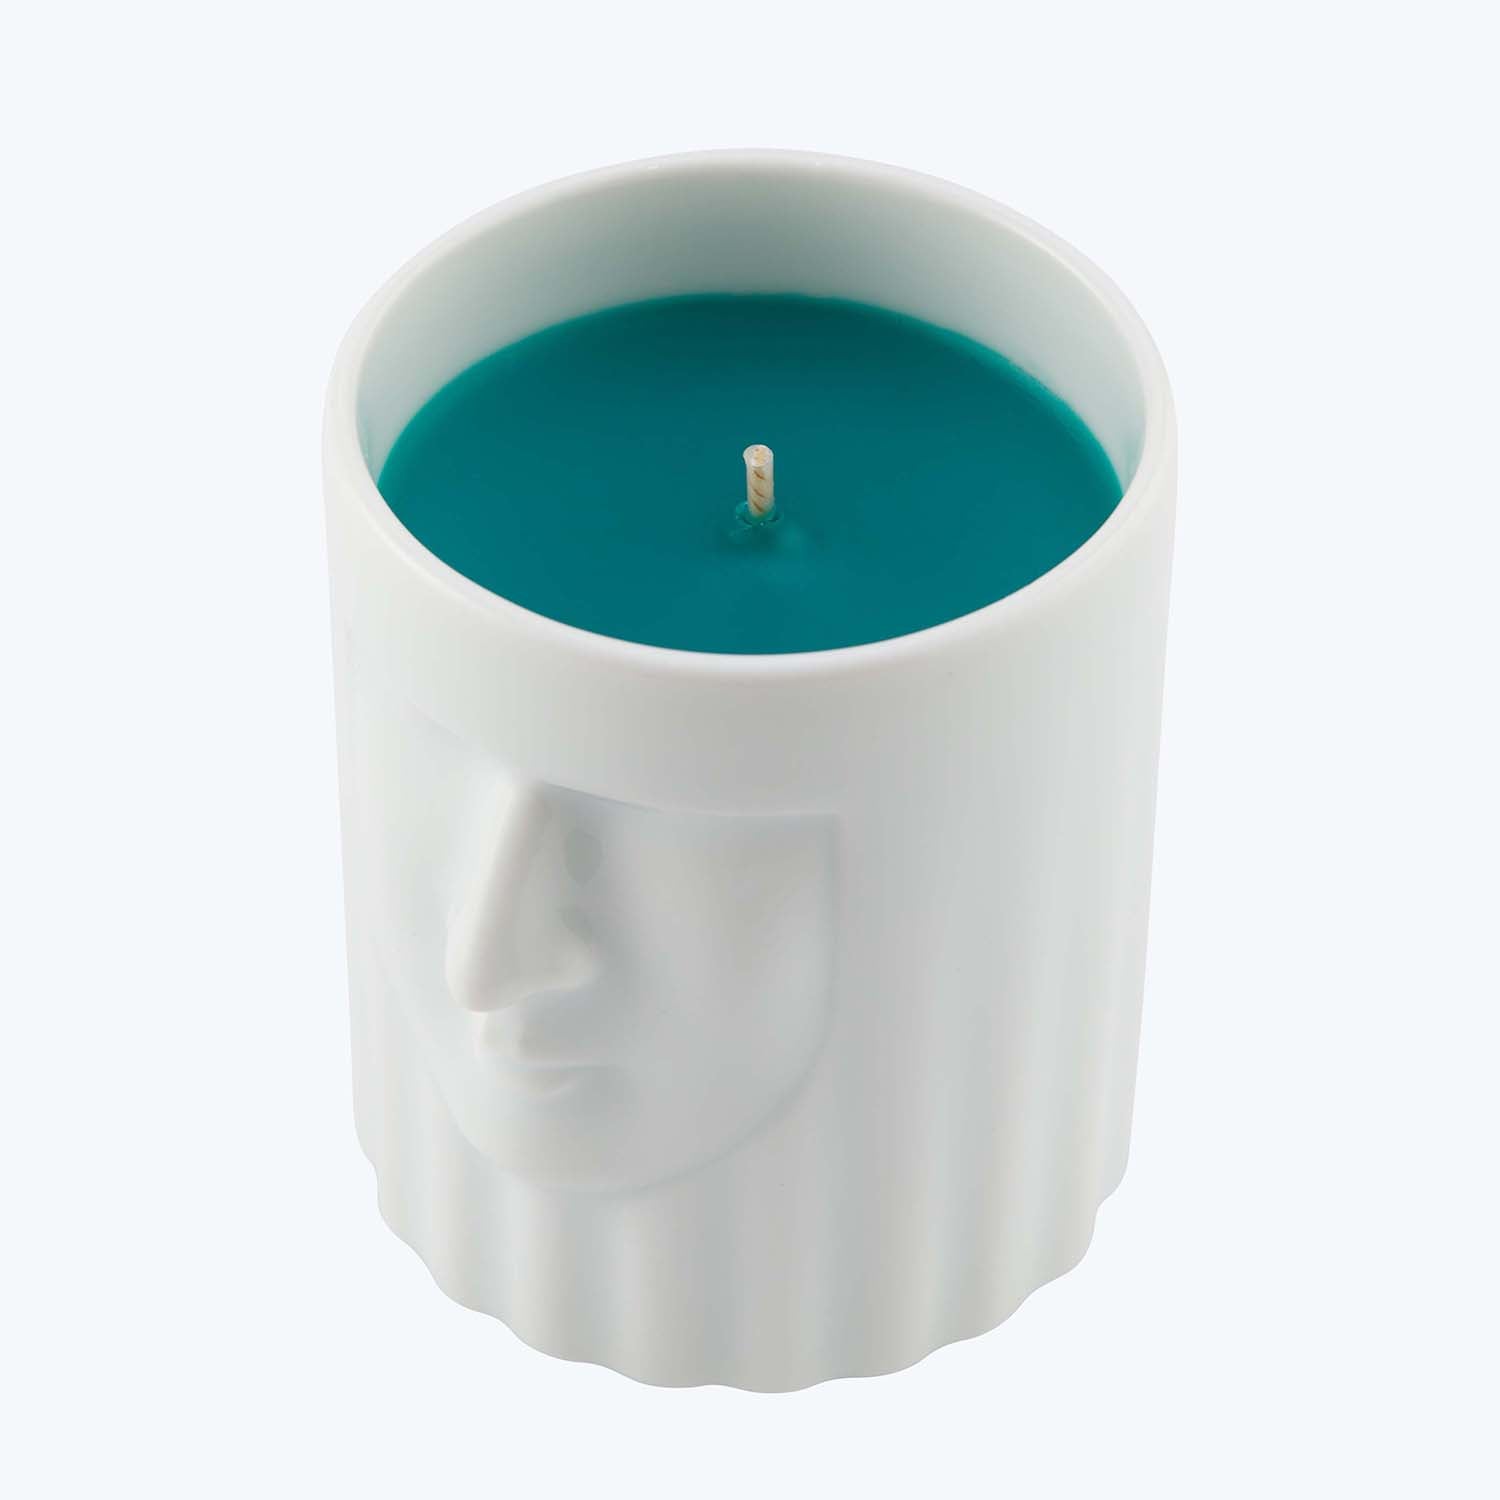 Cylindrical candle with human-like face design in vibrant teal.